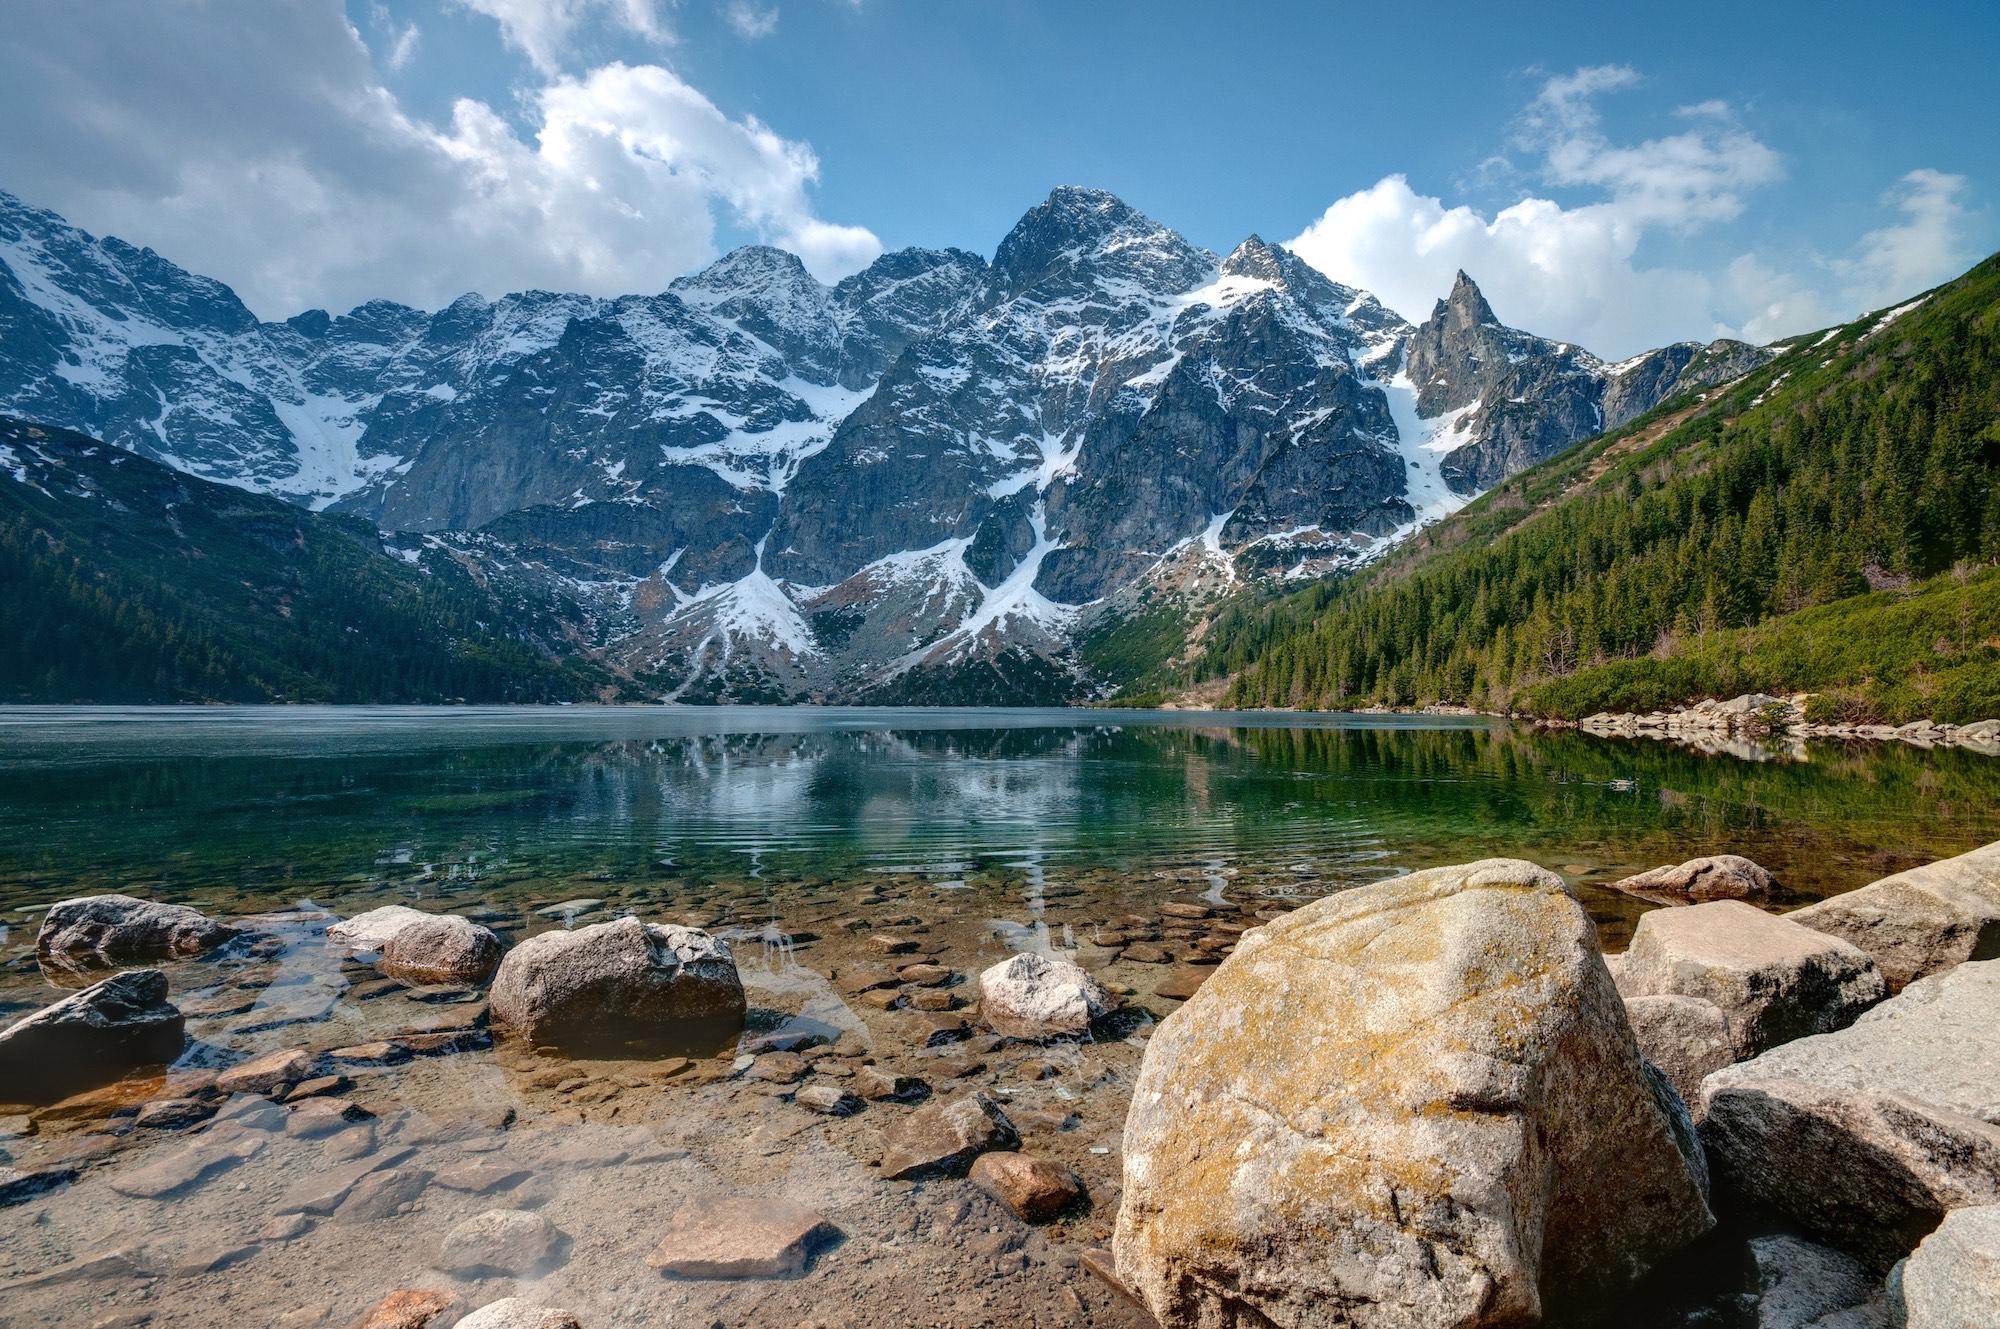 Morskie Oko Lake is the largest lake in the Tatra Mountains. On its banks is a historic mountain lodge, where you can have a meal or spend the night in cosy rooms and enjoy the breathtaking views. – © Albert Nowicki